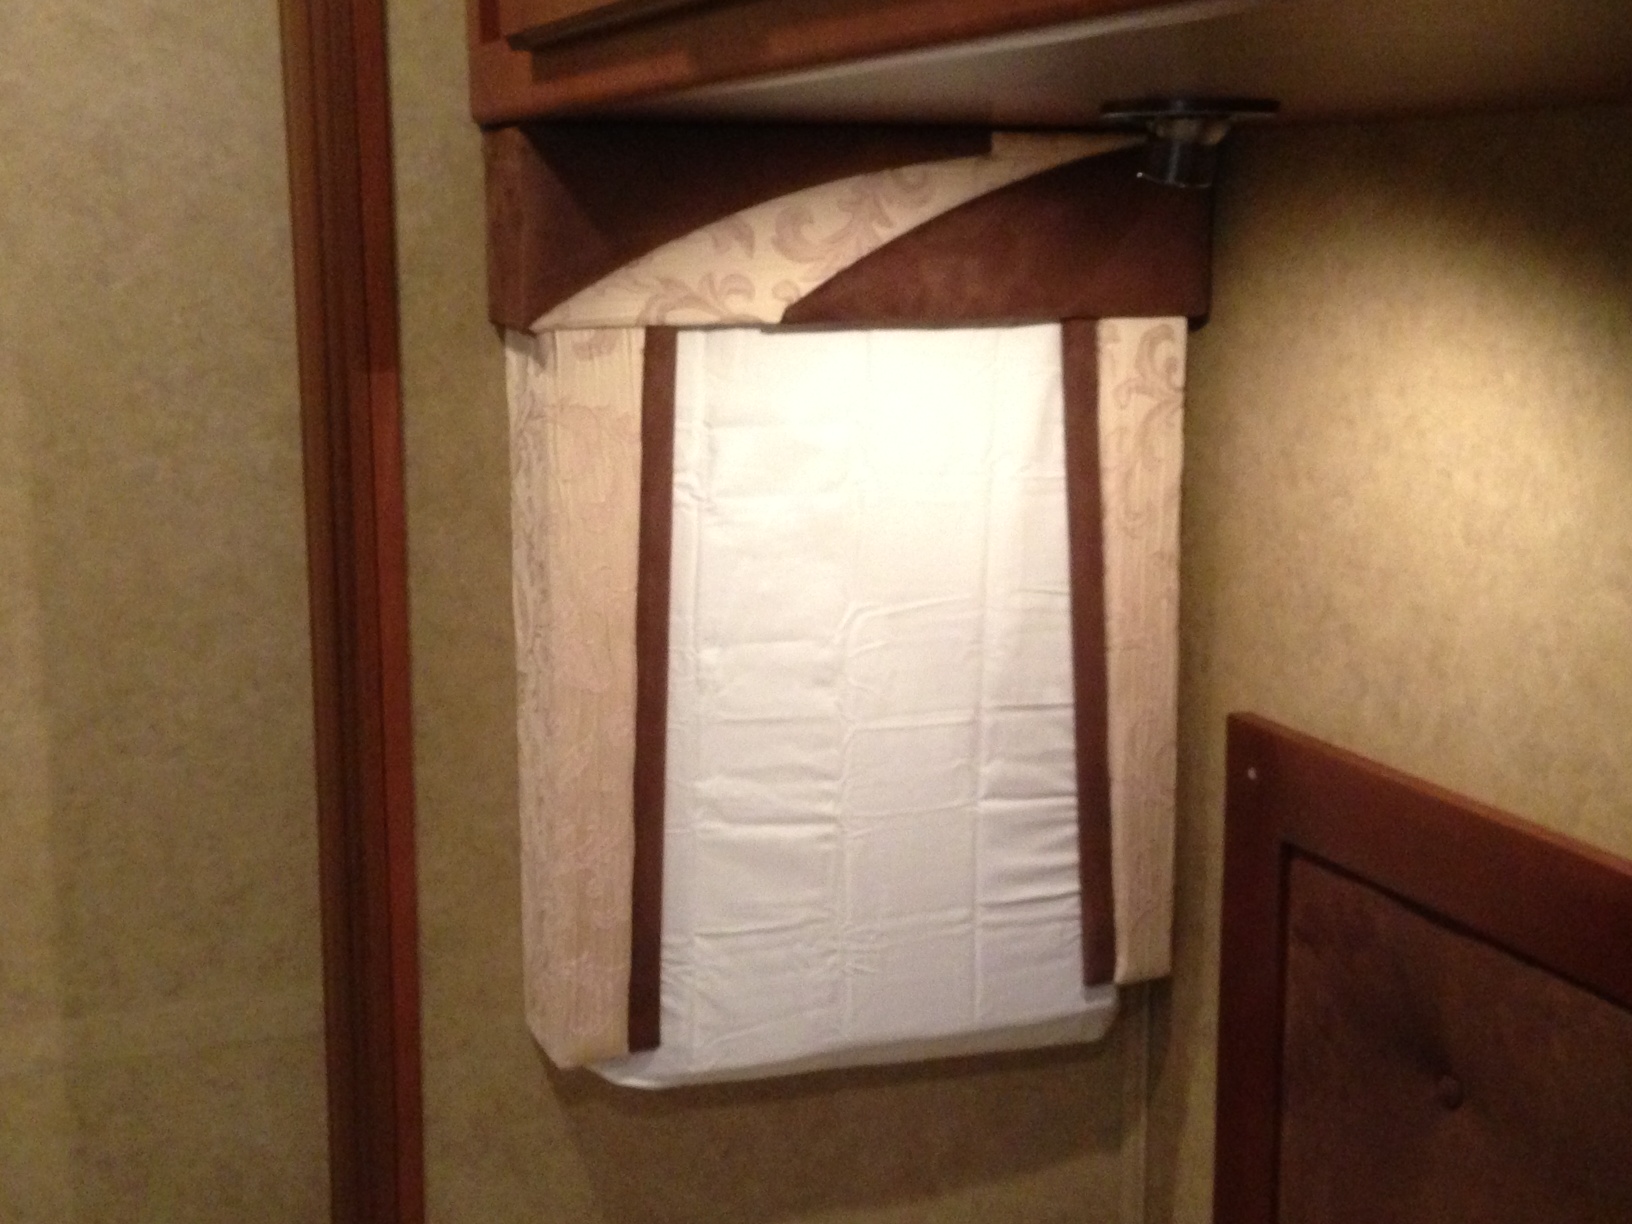 Using Blankets for RV Curtains